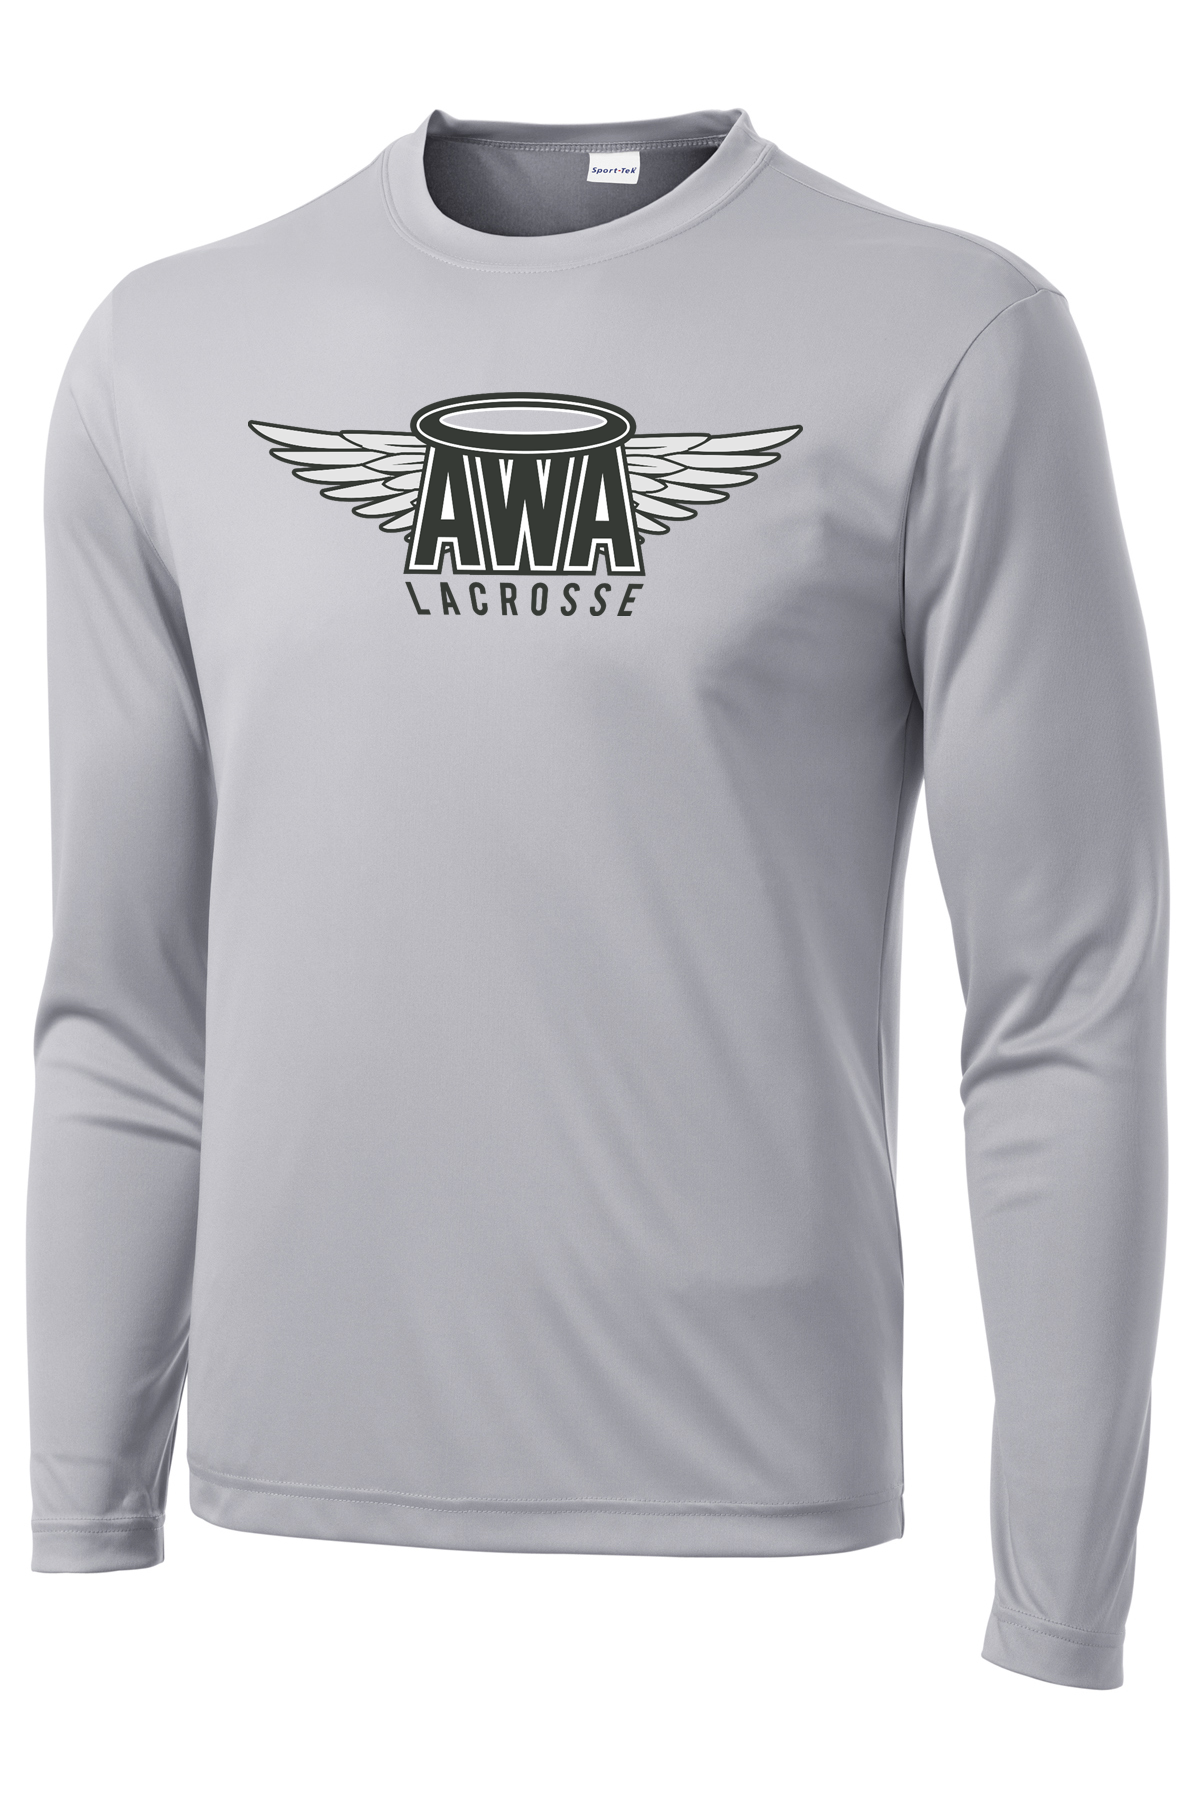 Angels With Attitude  Long Sleeve Performance Shirt